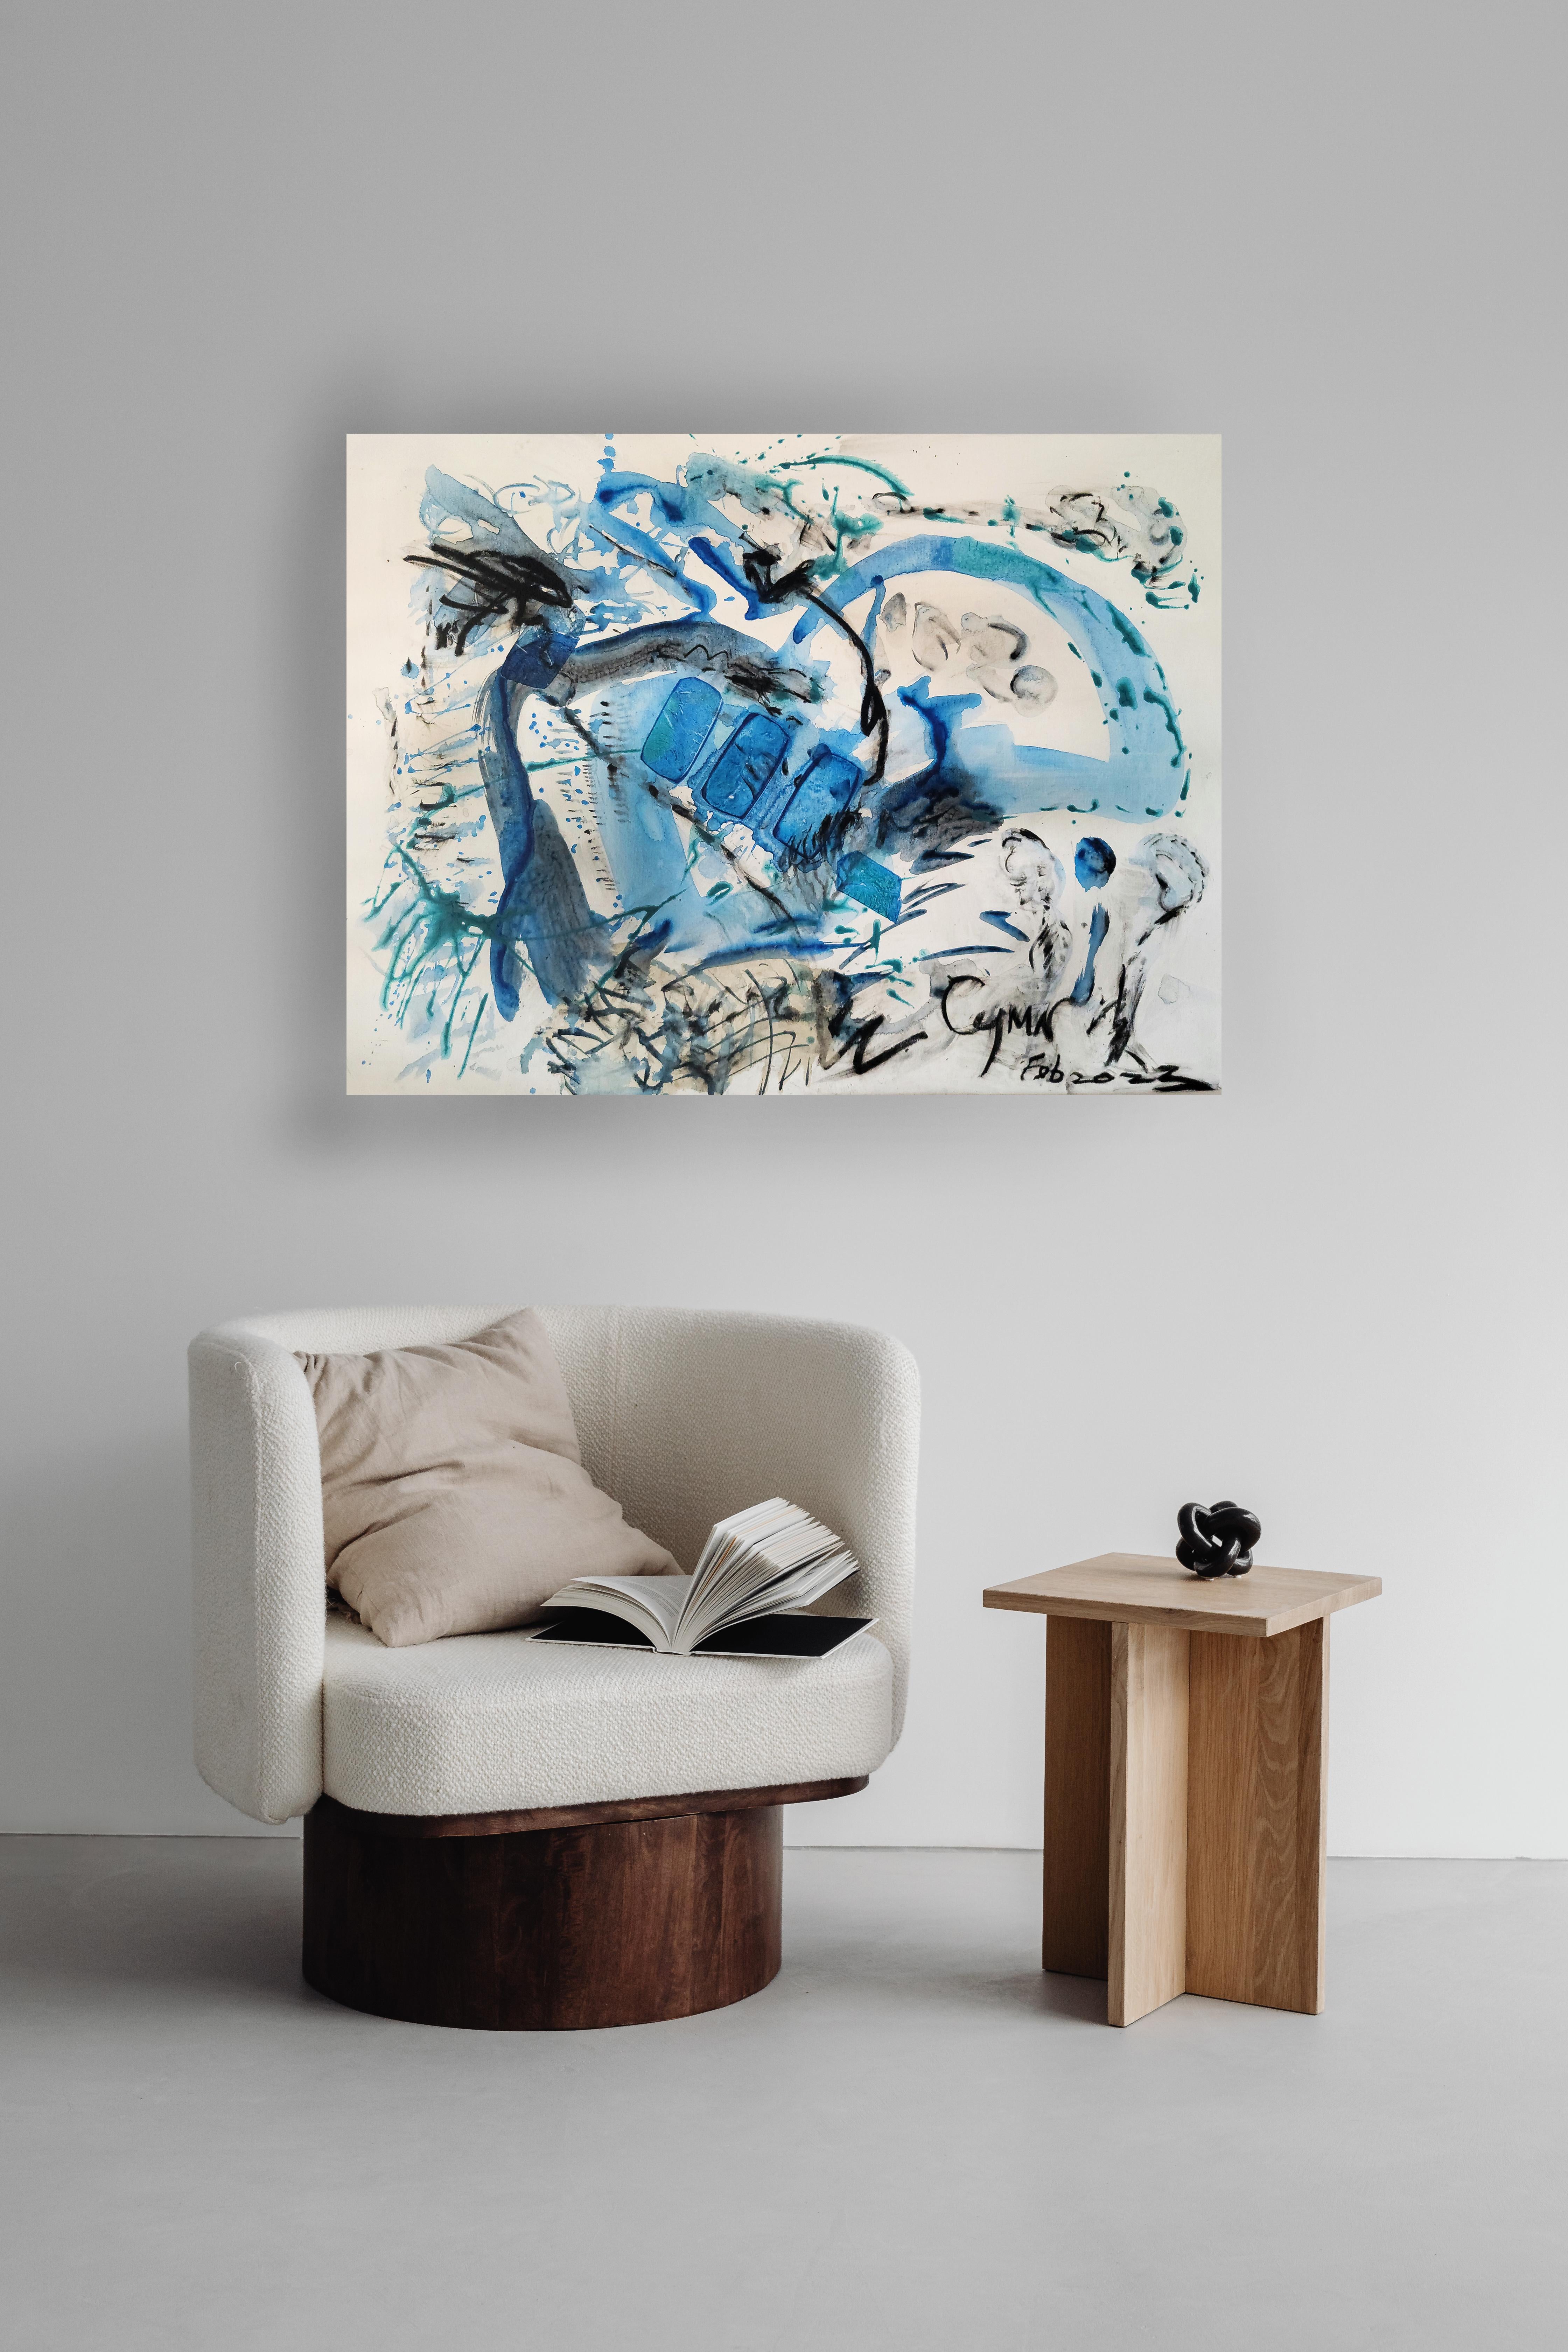 Ocean's Embrace - Abstract Expressionist Painting by Cymn Wong 